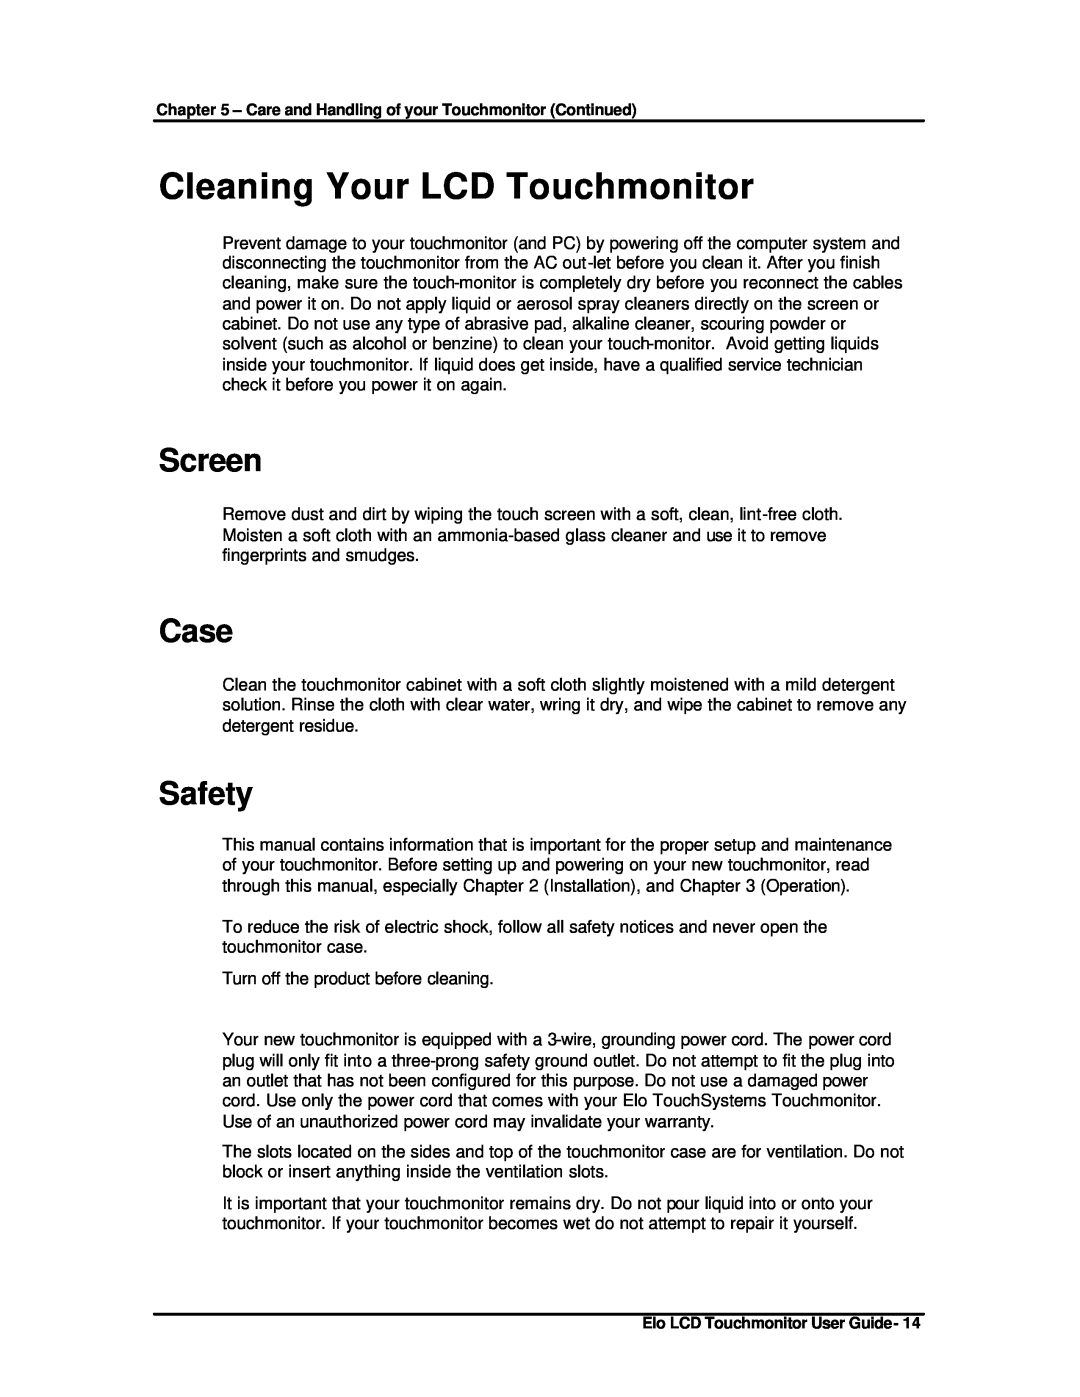 Elo TouchSystems ET1825L-8SWA-1 manual Cleaning Your LCD Touchmonitor, Screen, Case, Safety 